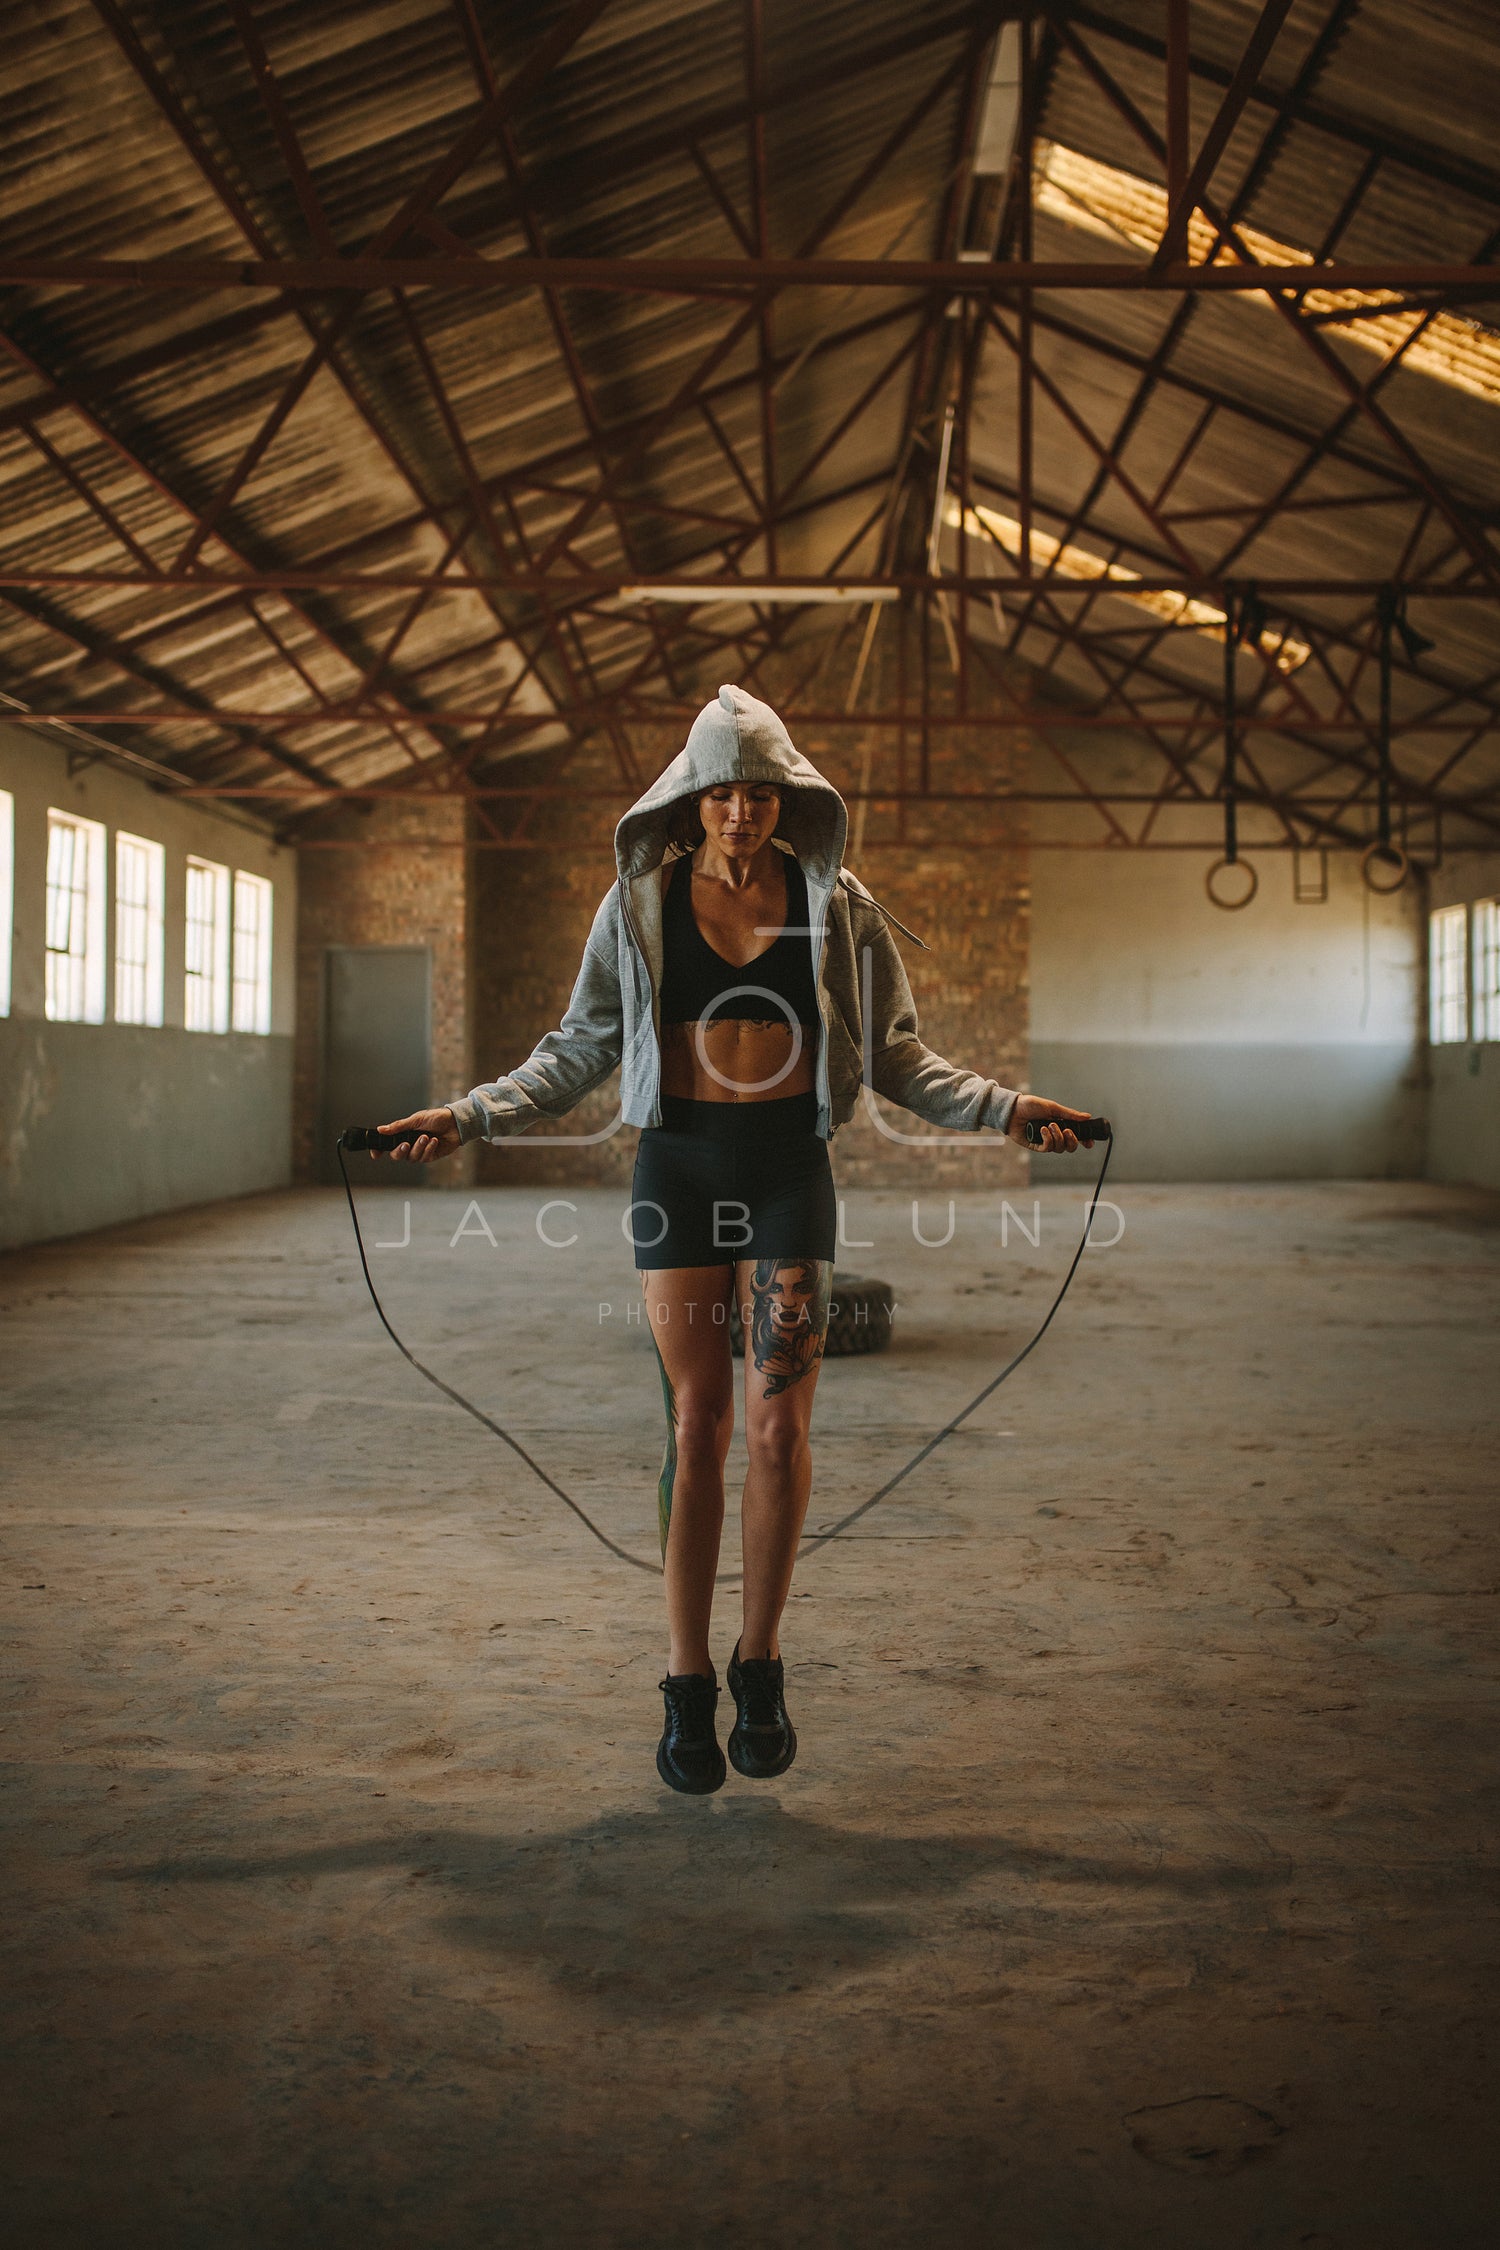 Fit young woman skipping rope – Jacob Lund Photography Store